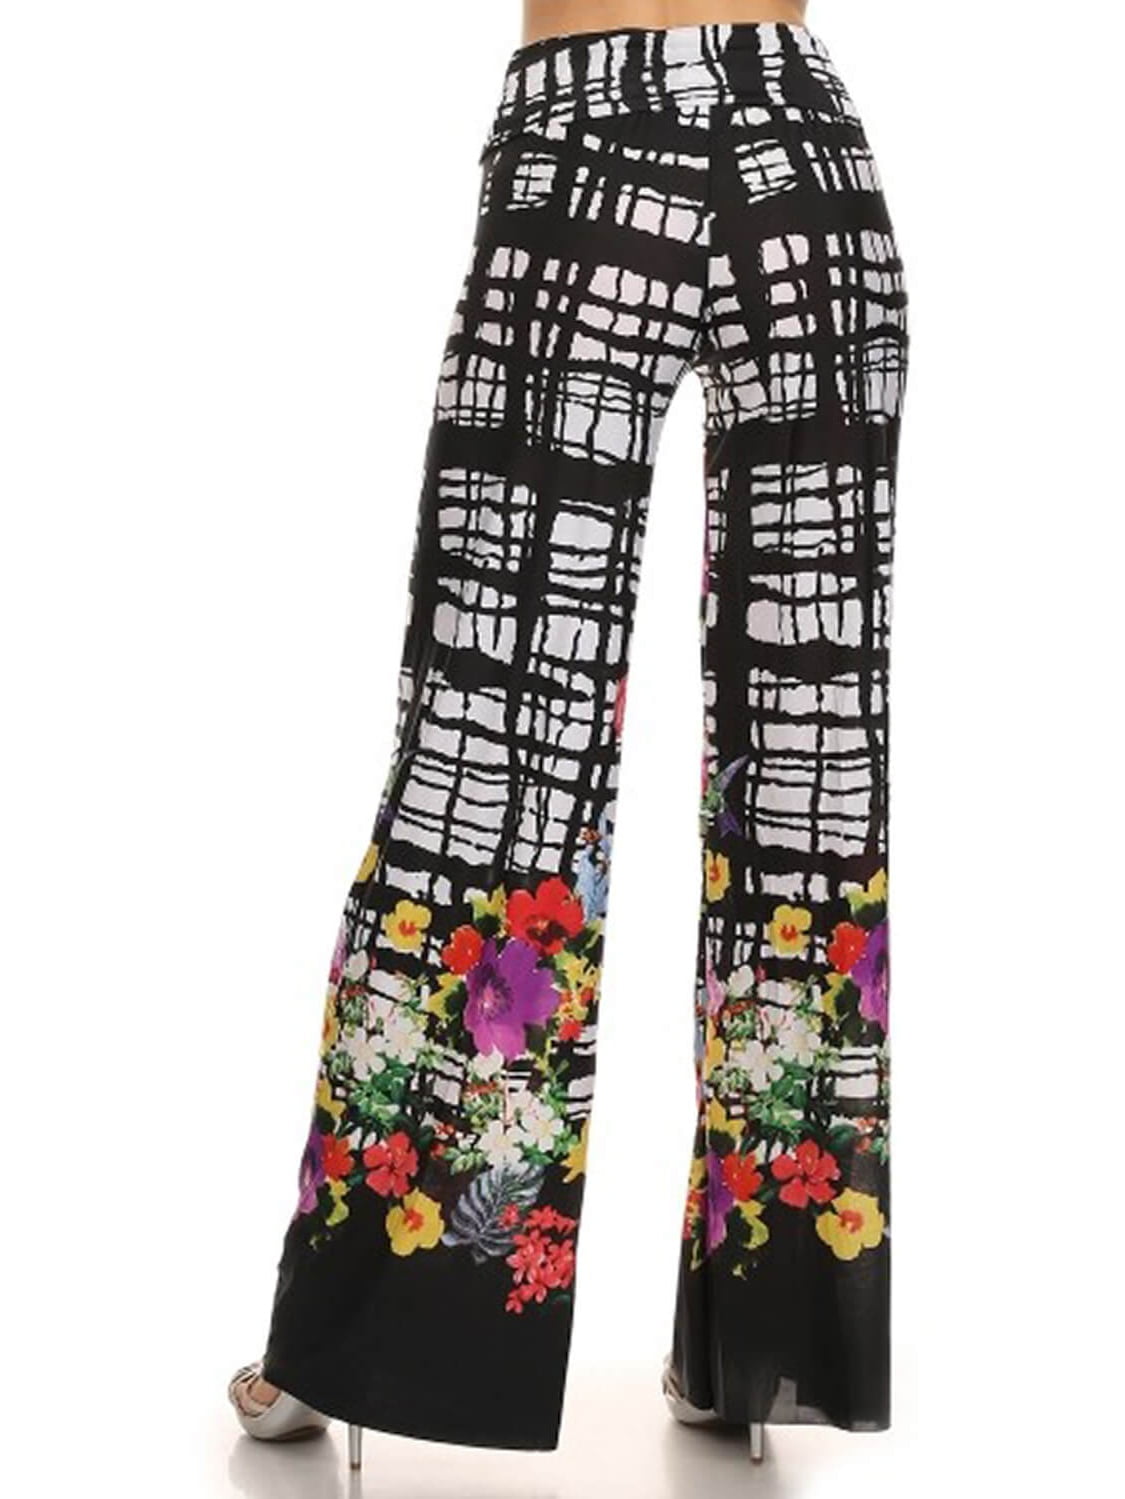 Black and White Damask Print Palazzo Pants with Fold-Over Waist, Small